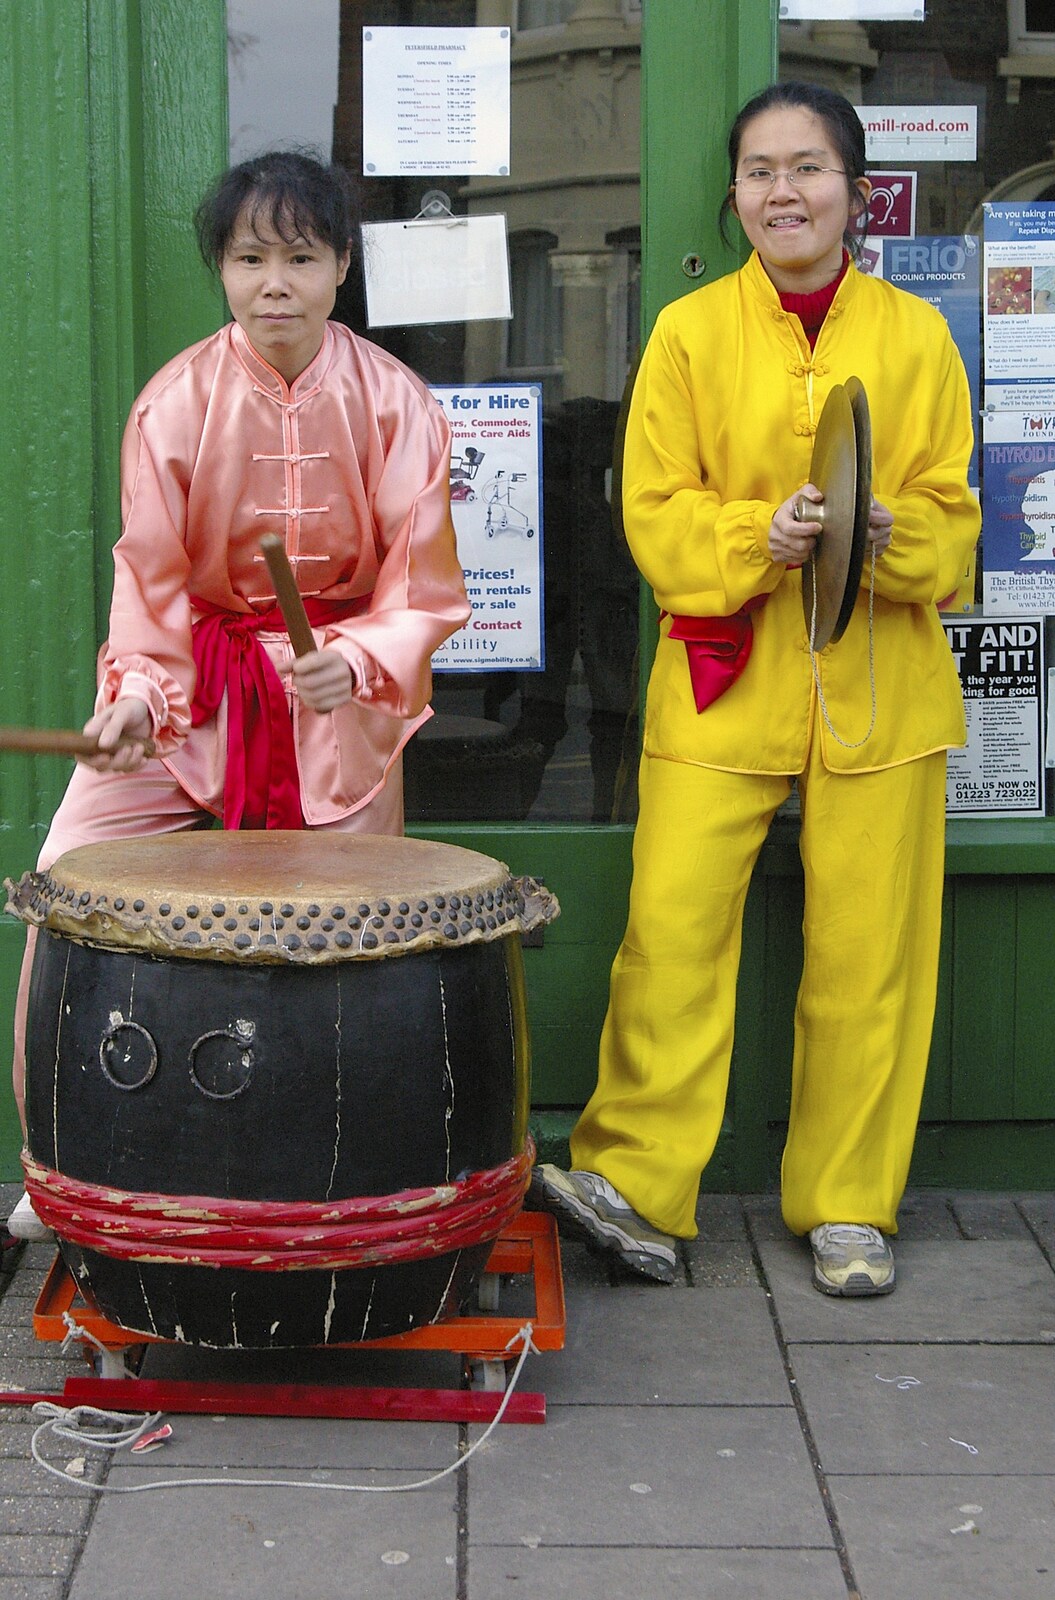 Chinese percussion from The Winter Fair, Mill Road, Cambridge - 2nd December 2006